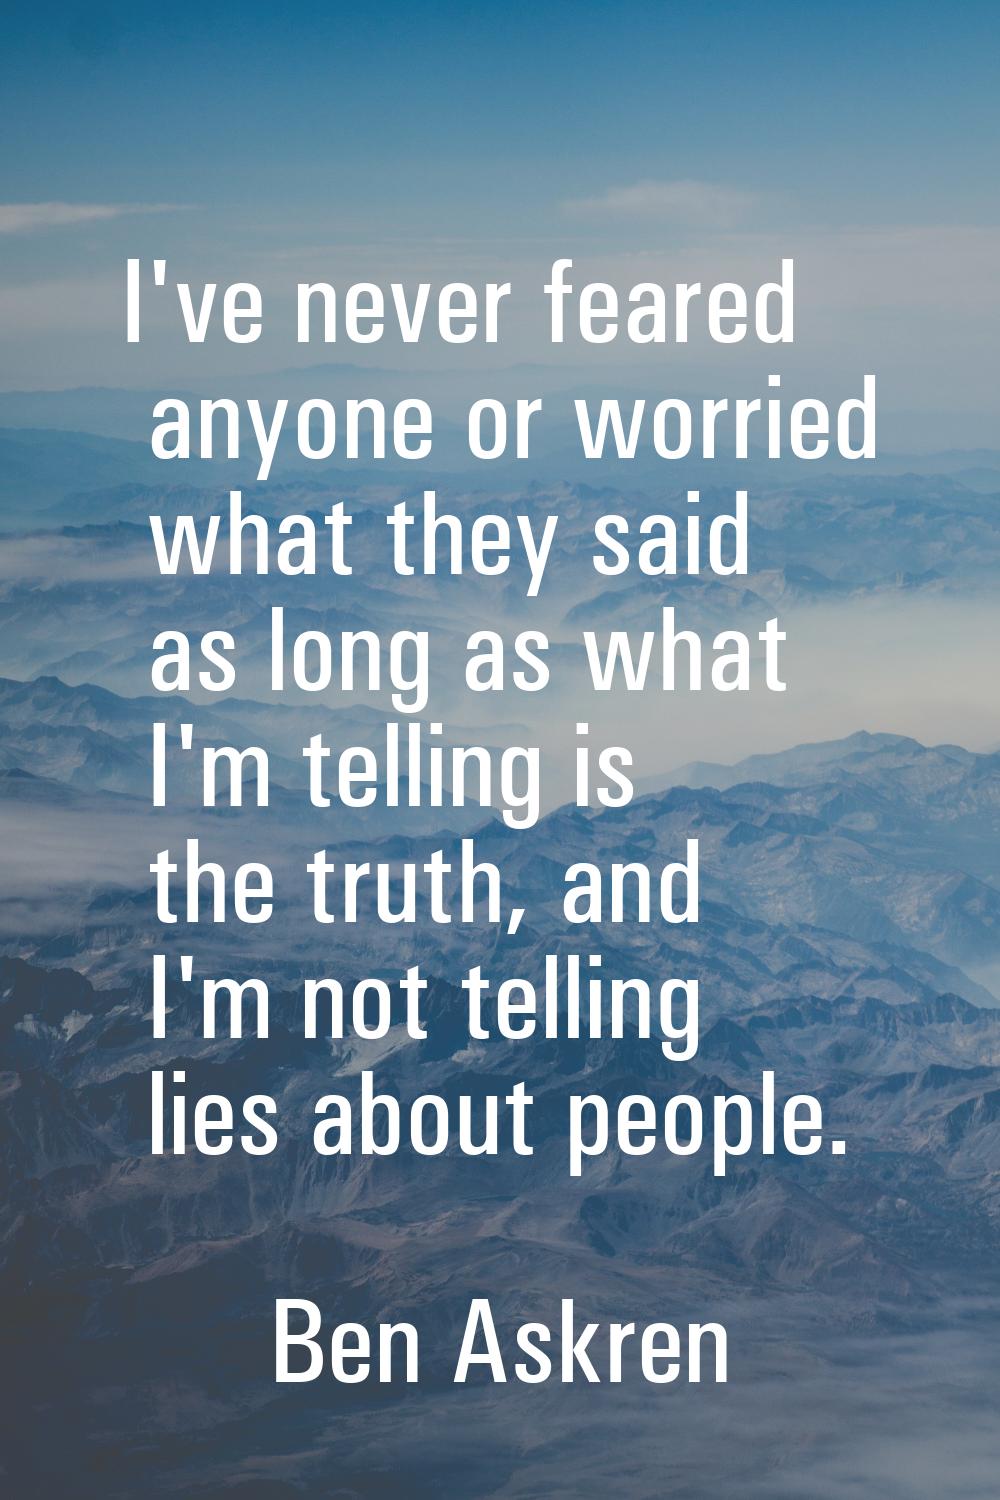 I've never feared anyone or worried what they said as long as what I'm telling is the truth, and I'